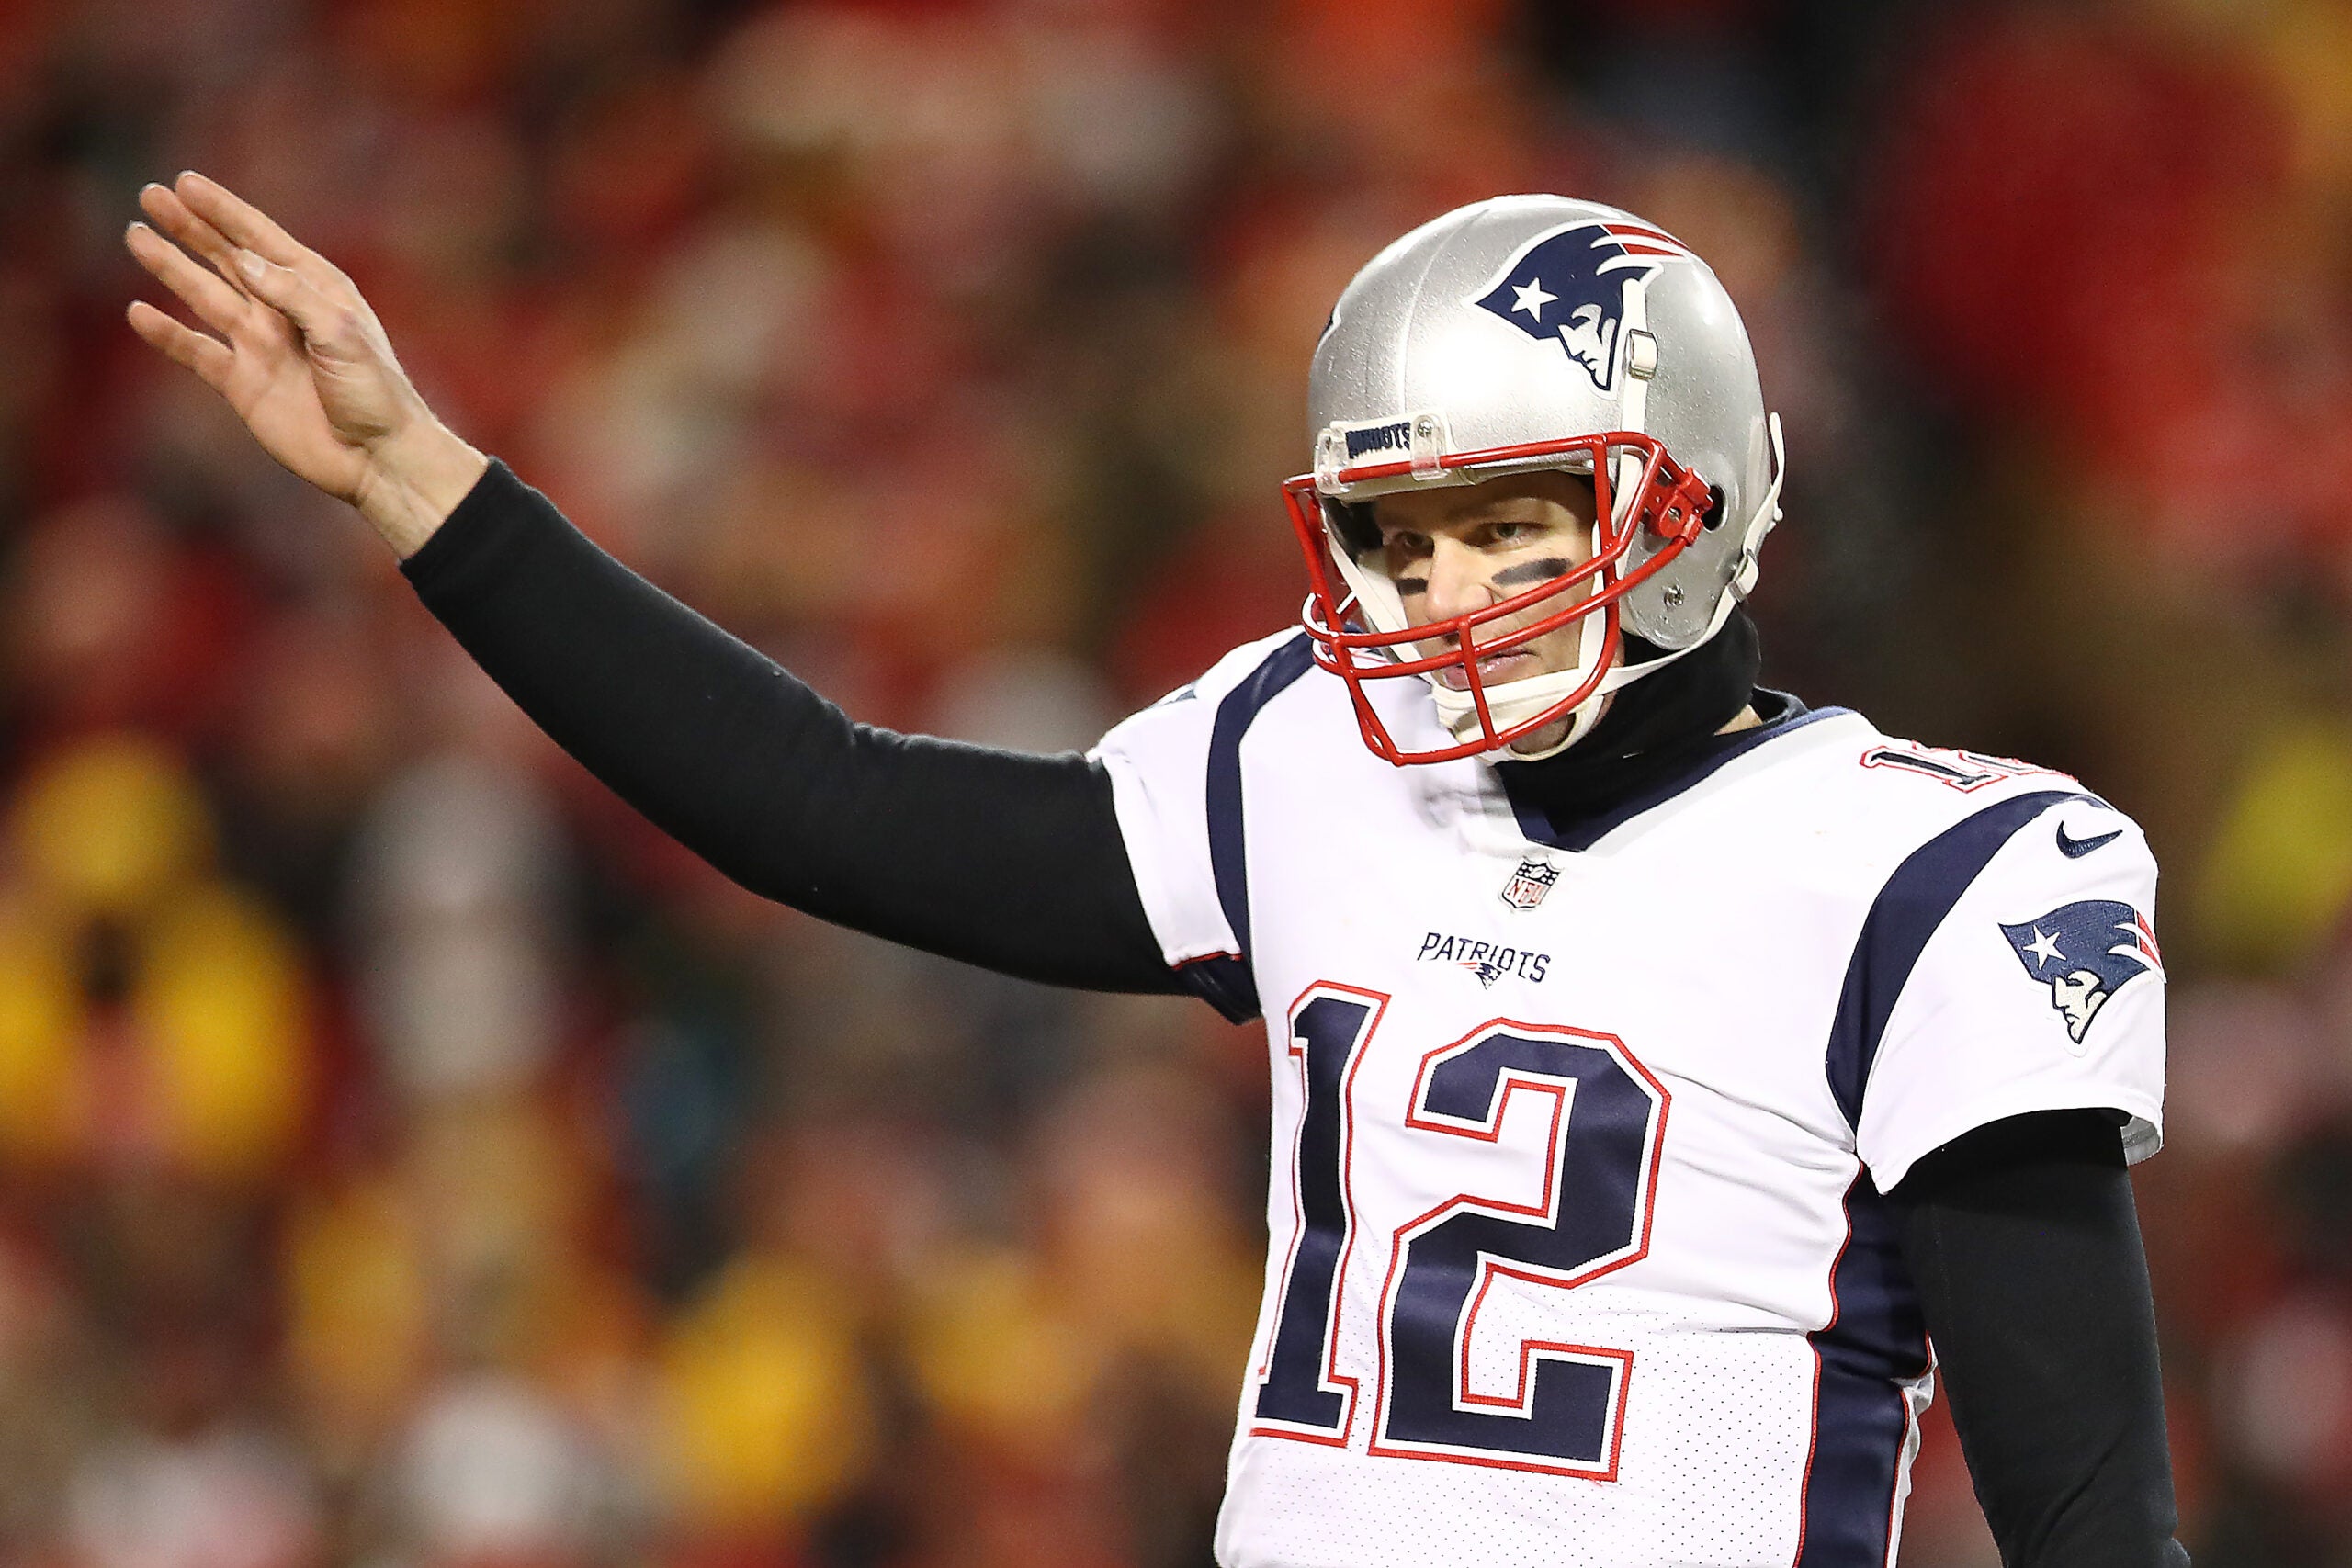 Brady Says 'I Still Have More To Prove' In Instagram Post